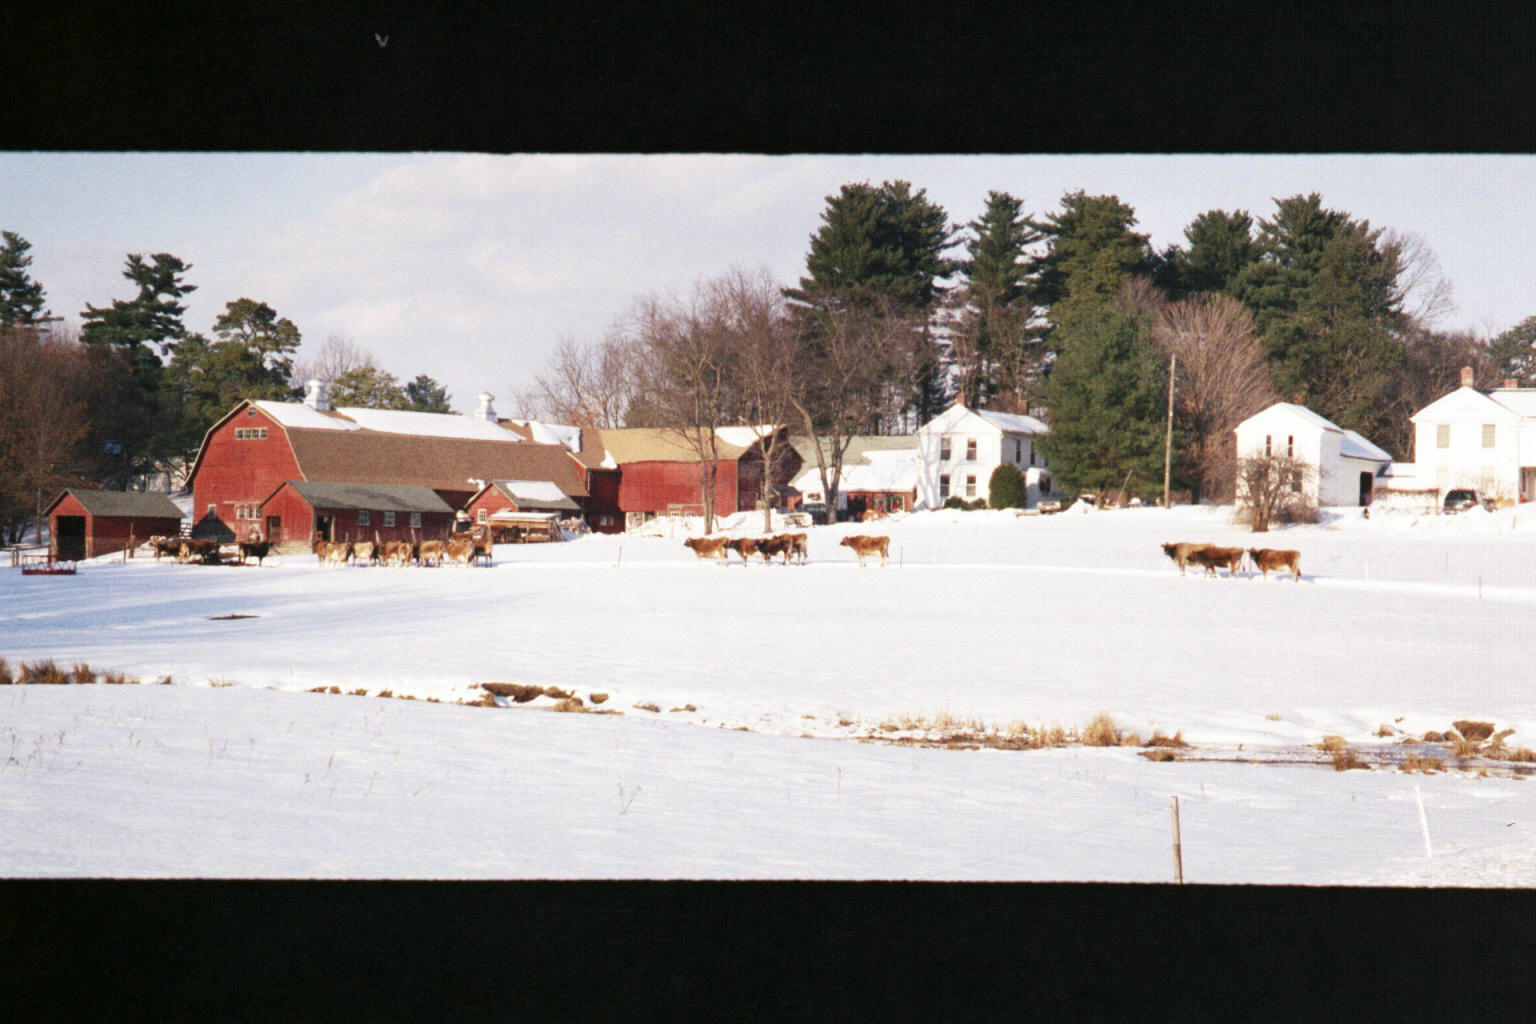 Houston Putnam Lowry's picture of cows in the Simsbury CT snow